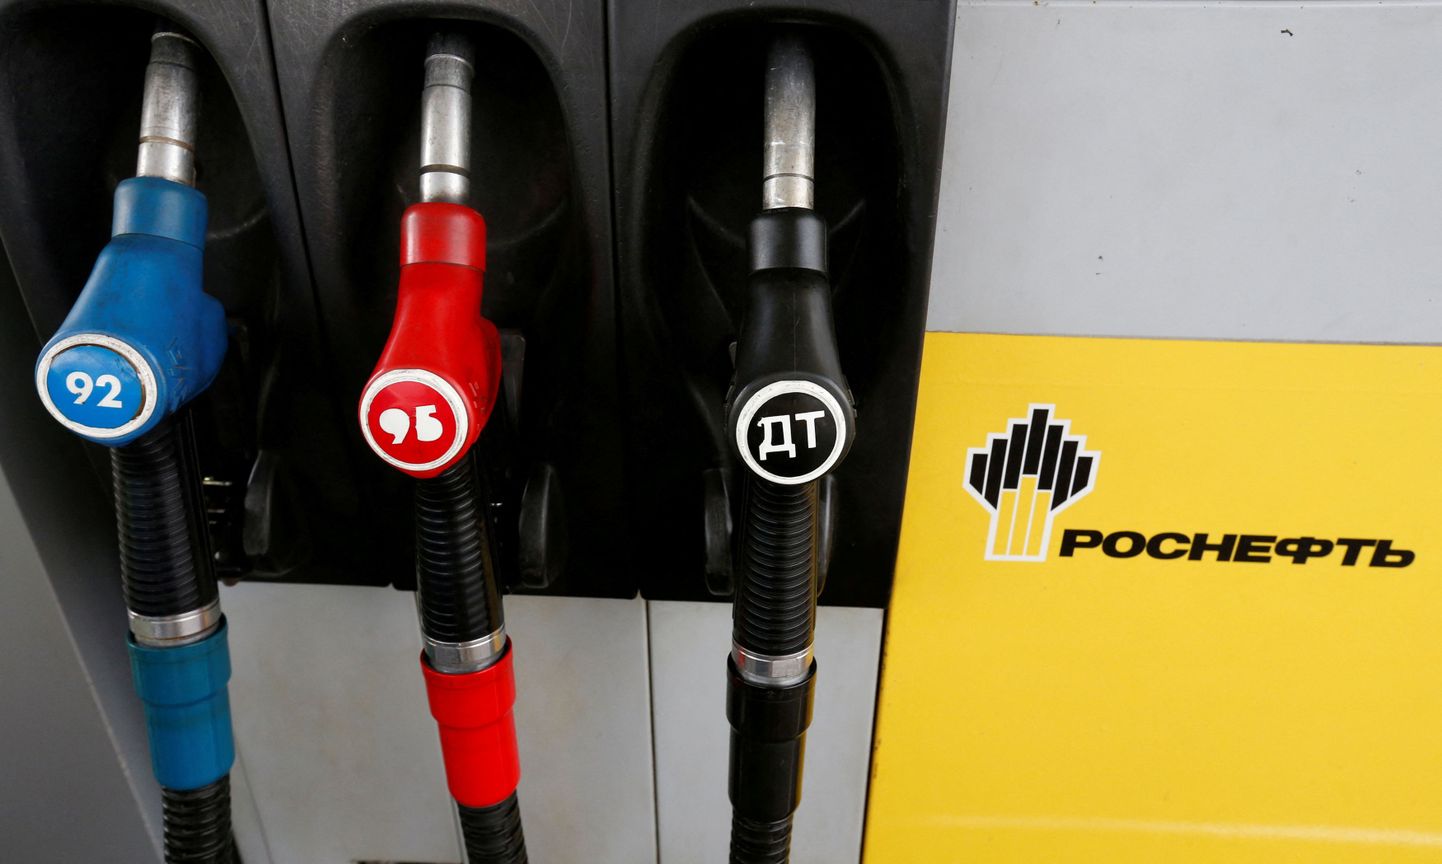 FILE PHOTO: Fuel nozzles are seen at a Rosneft petrol station in Moscow, Russia, July 4, 2016. REUTERS/Sergei Karpukhin/File Photo